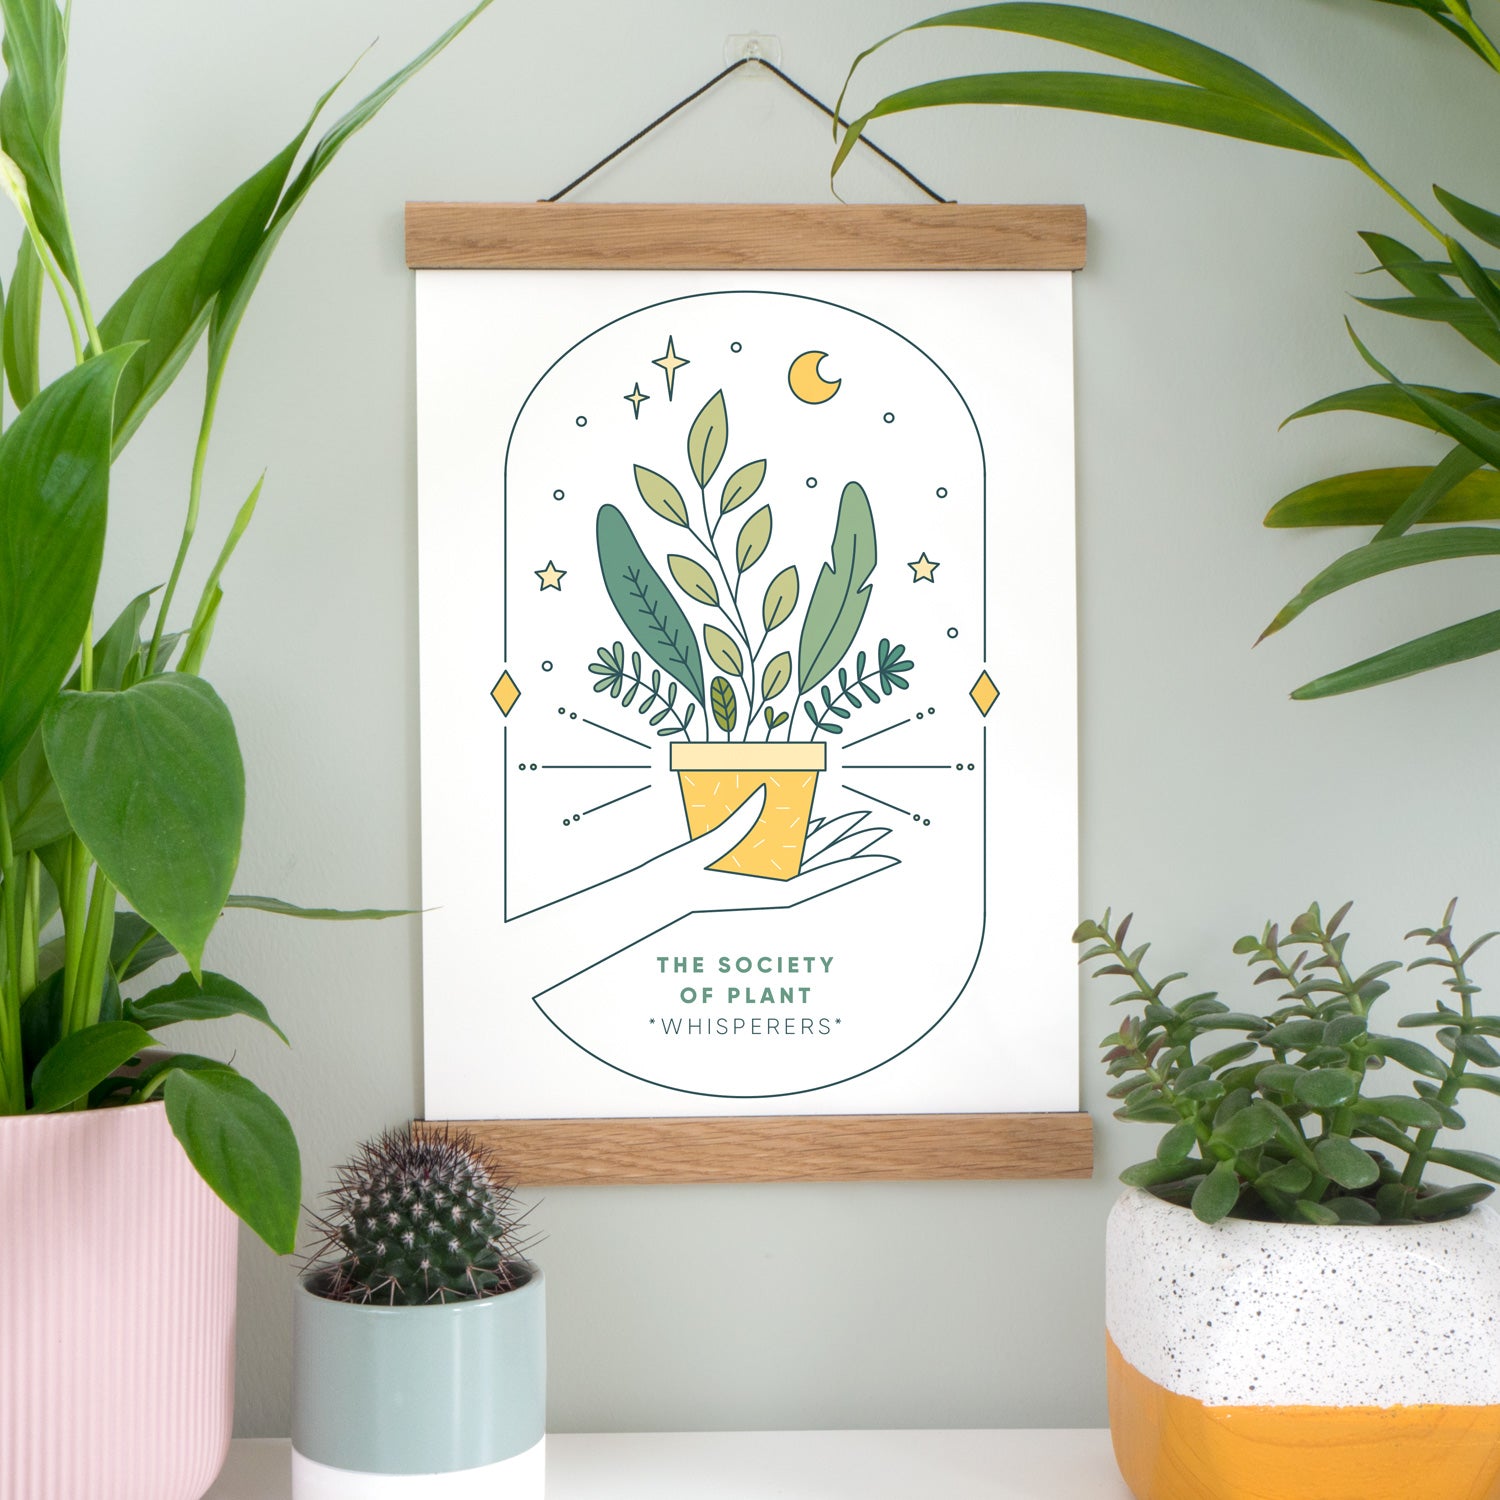 Joanne Hawker Society Of Plant Whispers Print In full colour surrounded by a range of natural foliage!